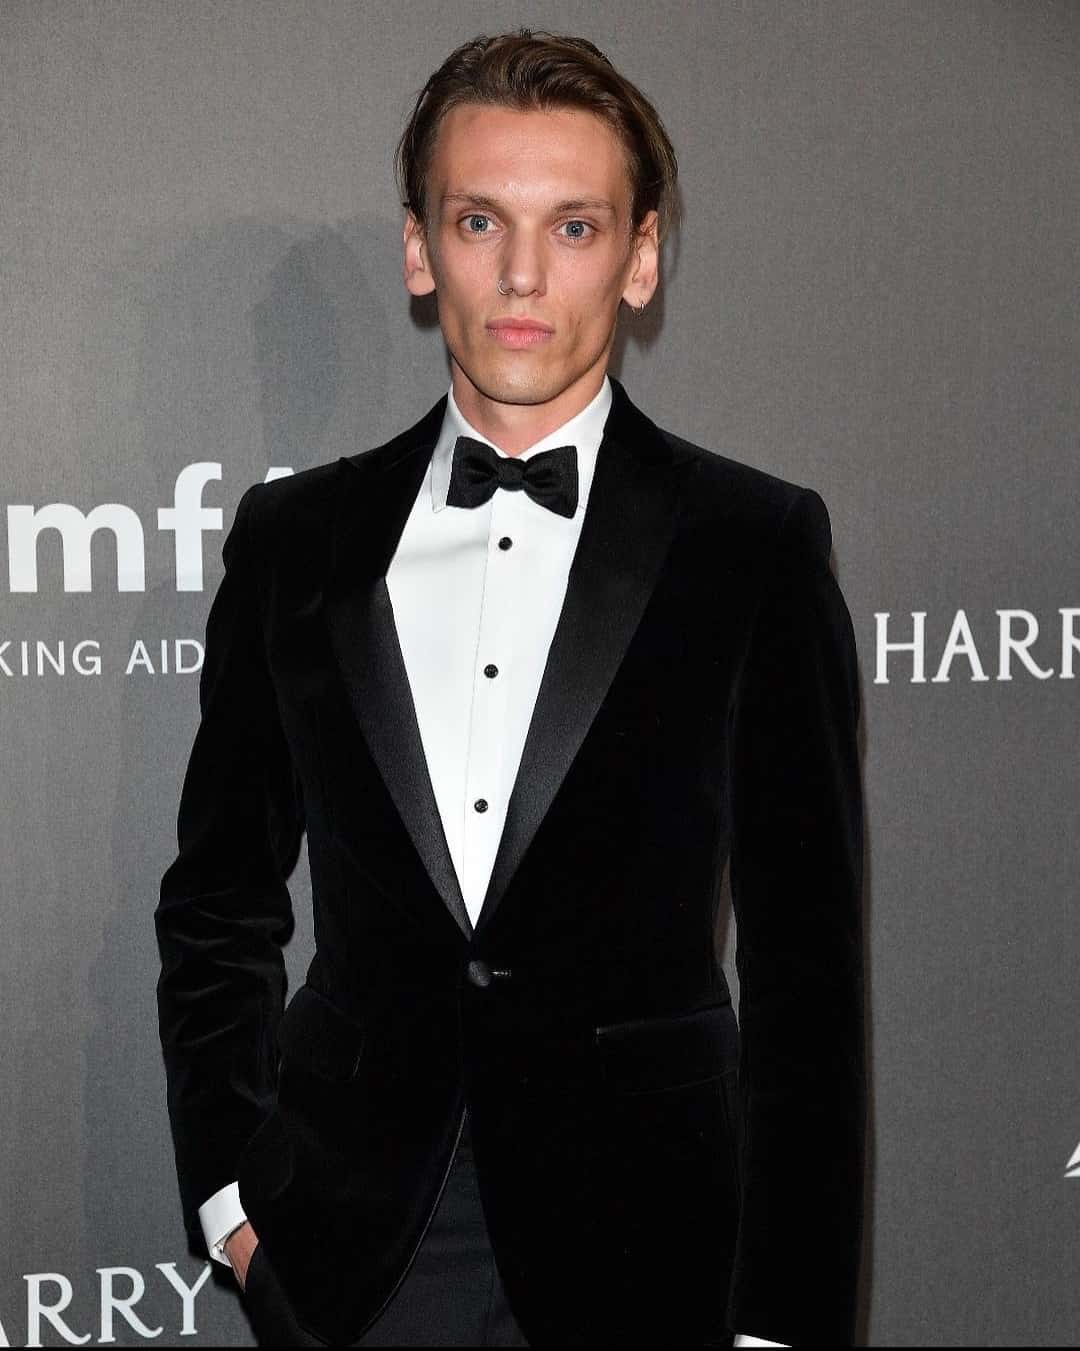 Jamie Campbell Bower Net Worth, Age, Family, Girlfriend, Biography, and More